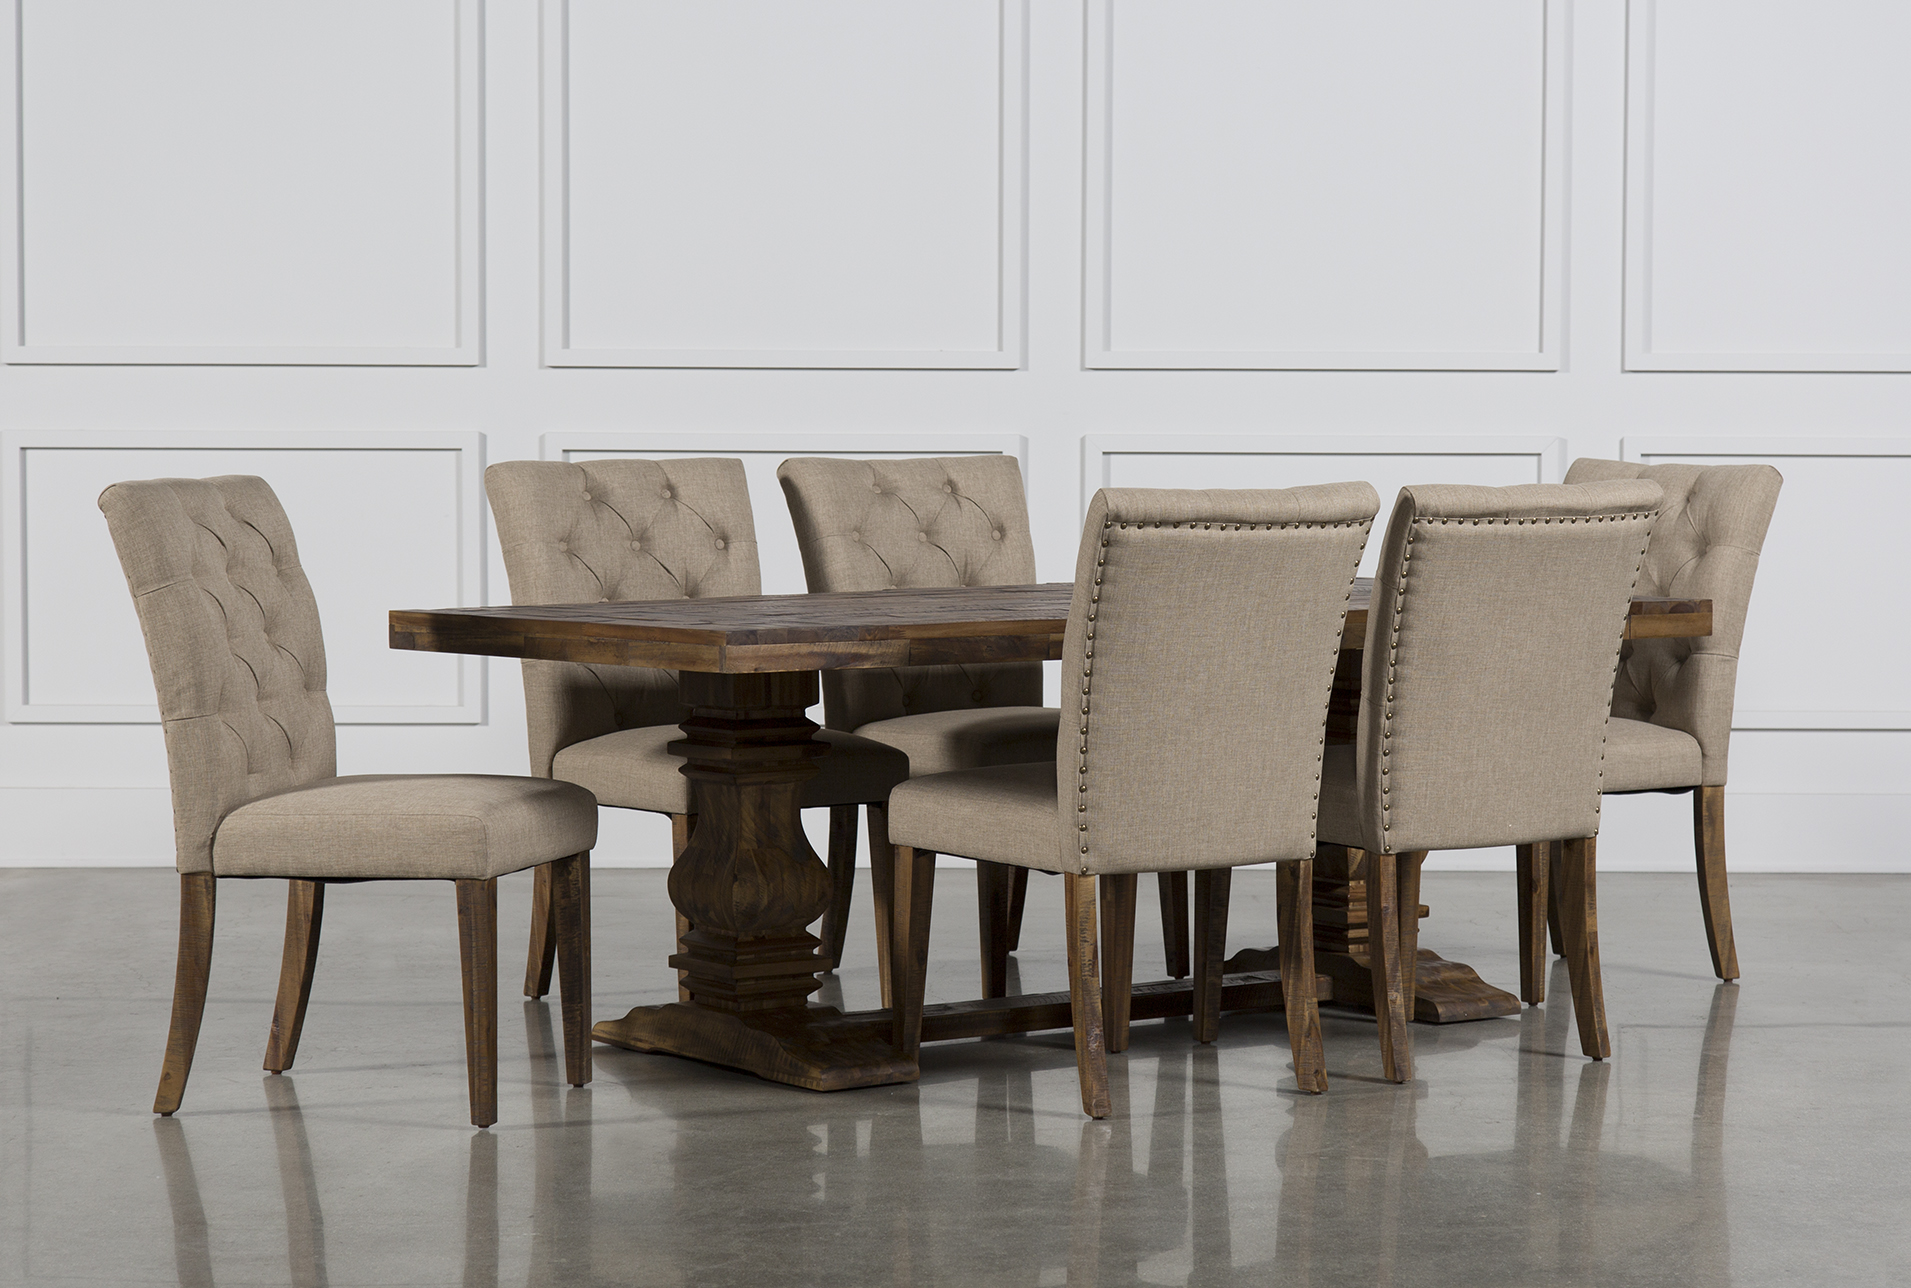 partridge 7 piece dining set (qty: 1) has been successfully added to your TXRYAVL